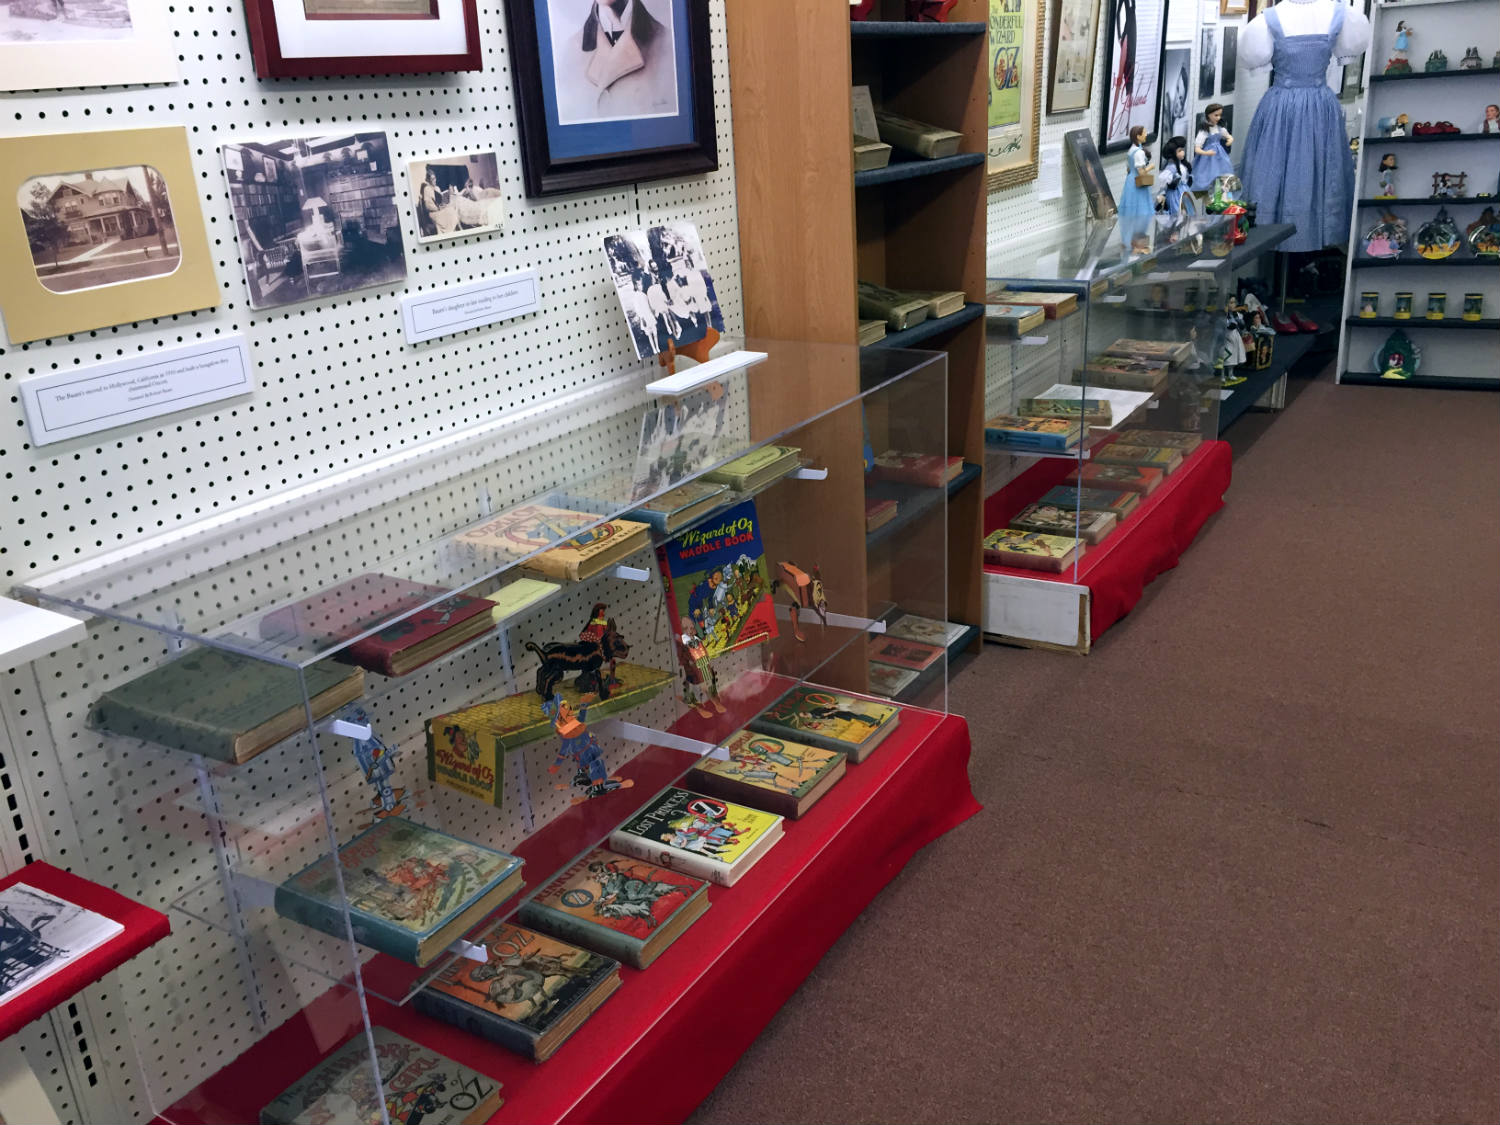 Display Case at the All Things Oz Museum in Chittenango, New York